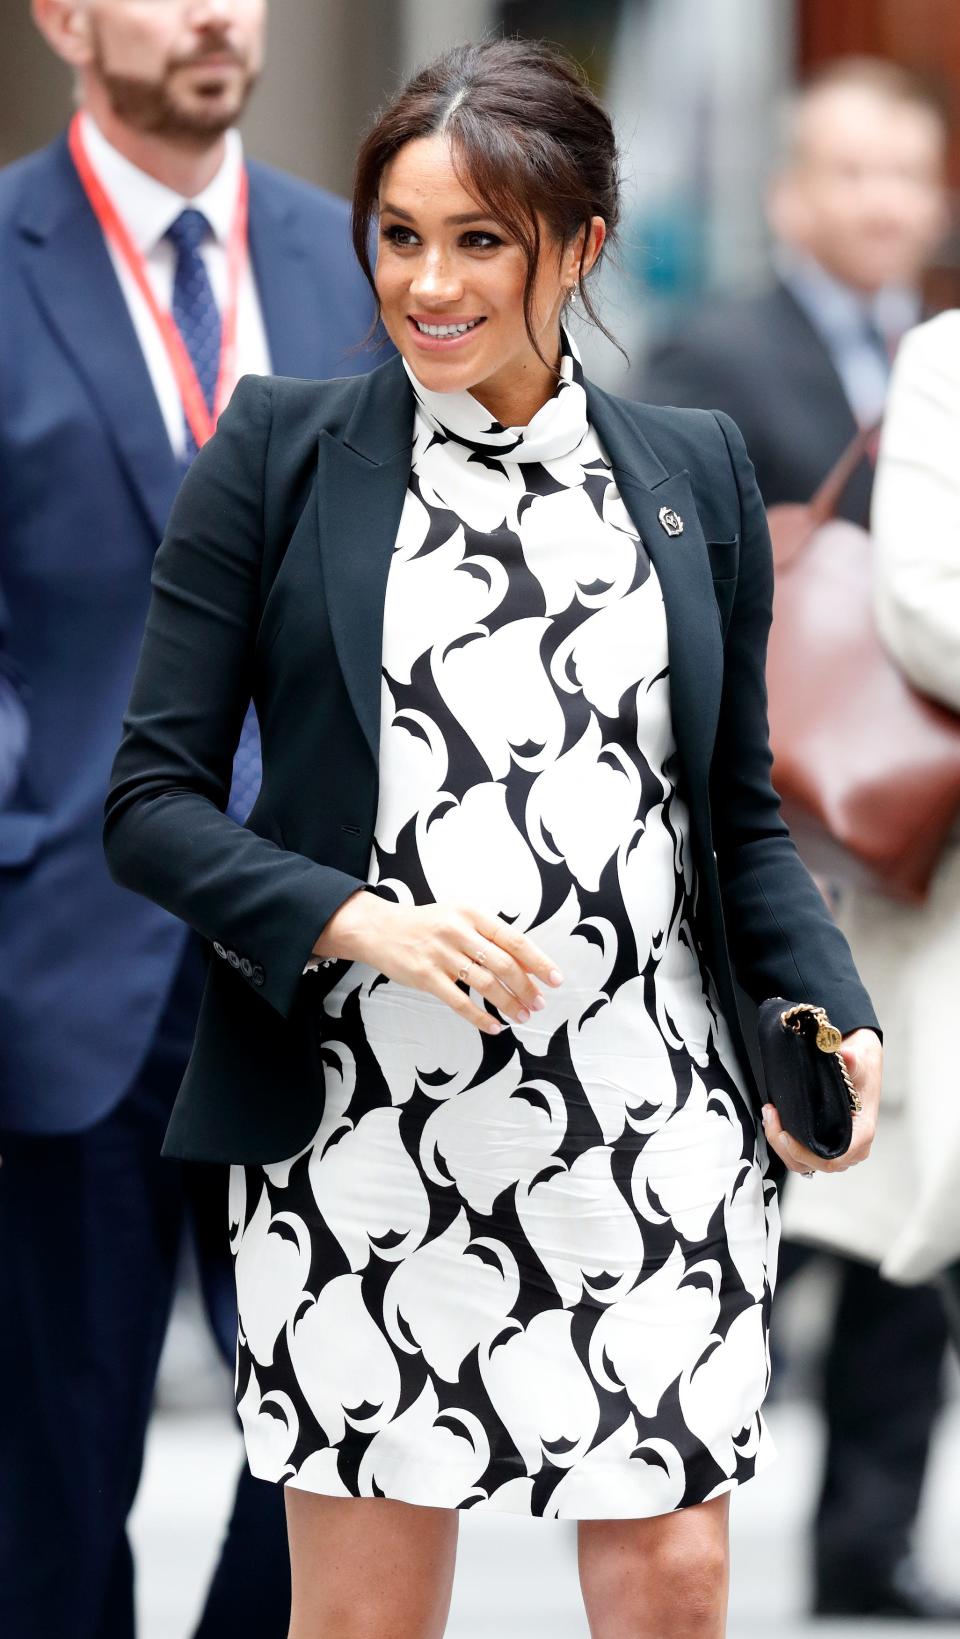 Meghan Markle wears a black and white minidress in 2019.